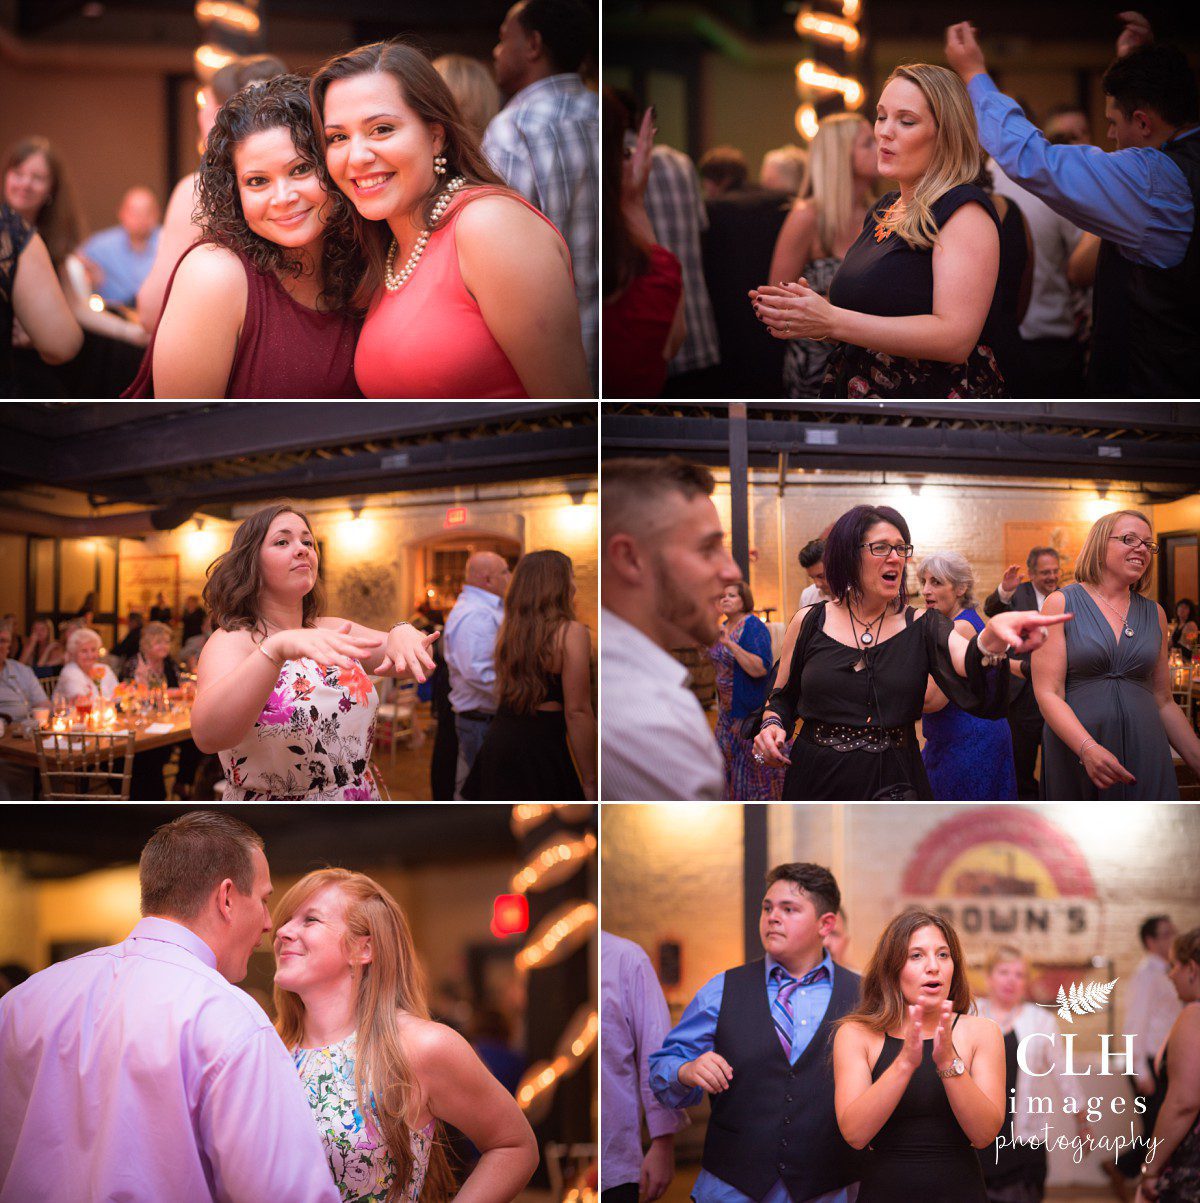 clh-images-photography-revolution-hall-wedding-troy-ny-wedding-albany-wedding-photography-troy-wedding-photography-150